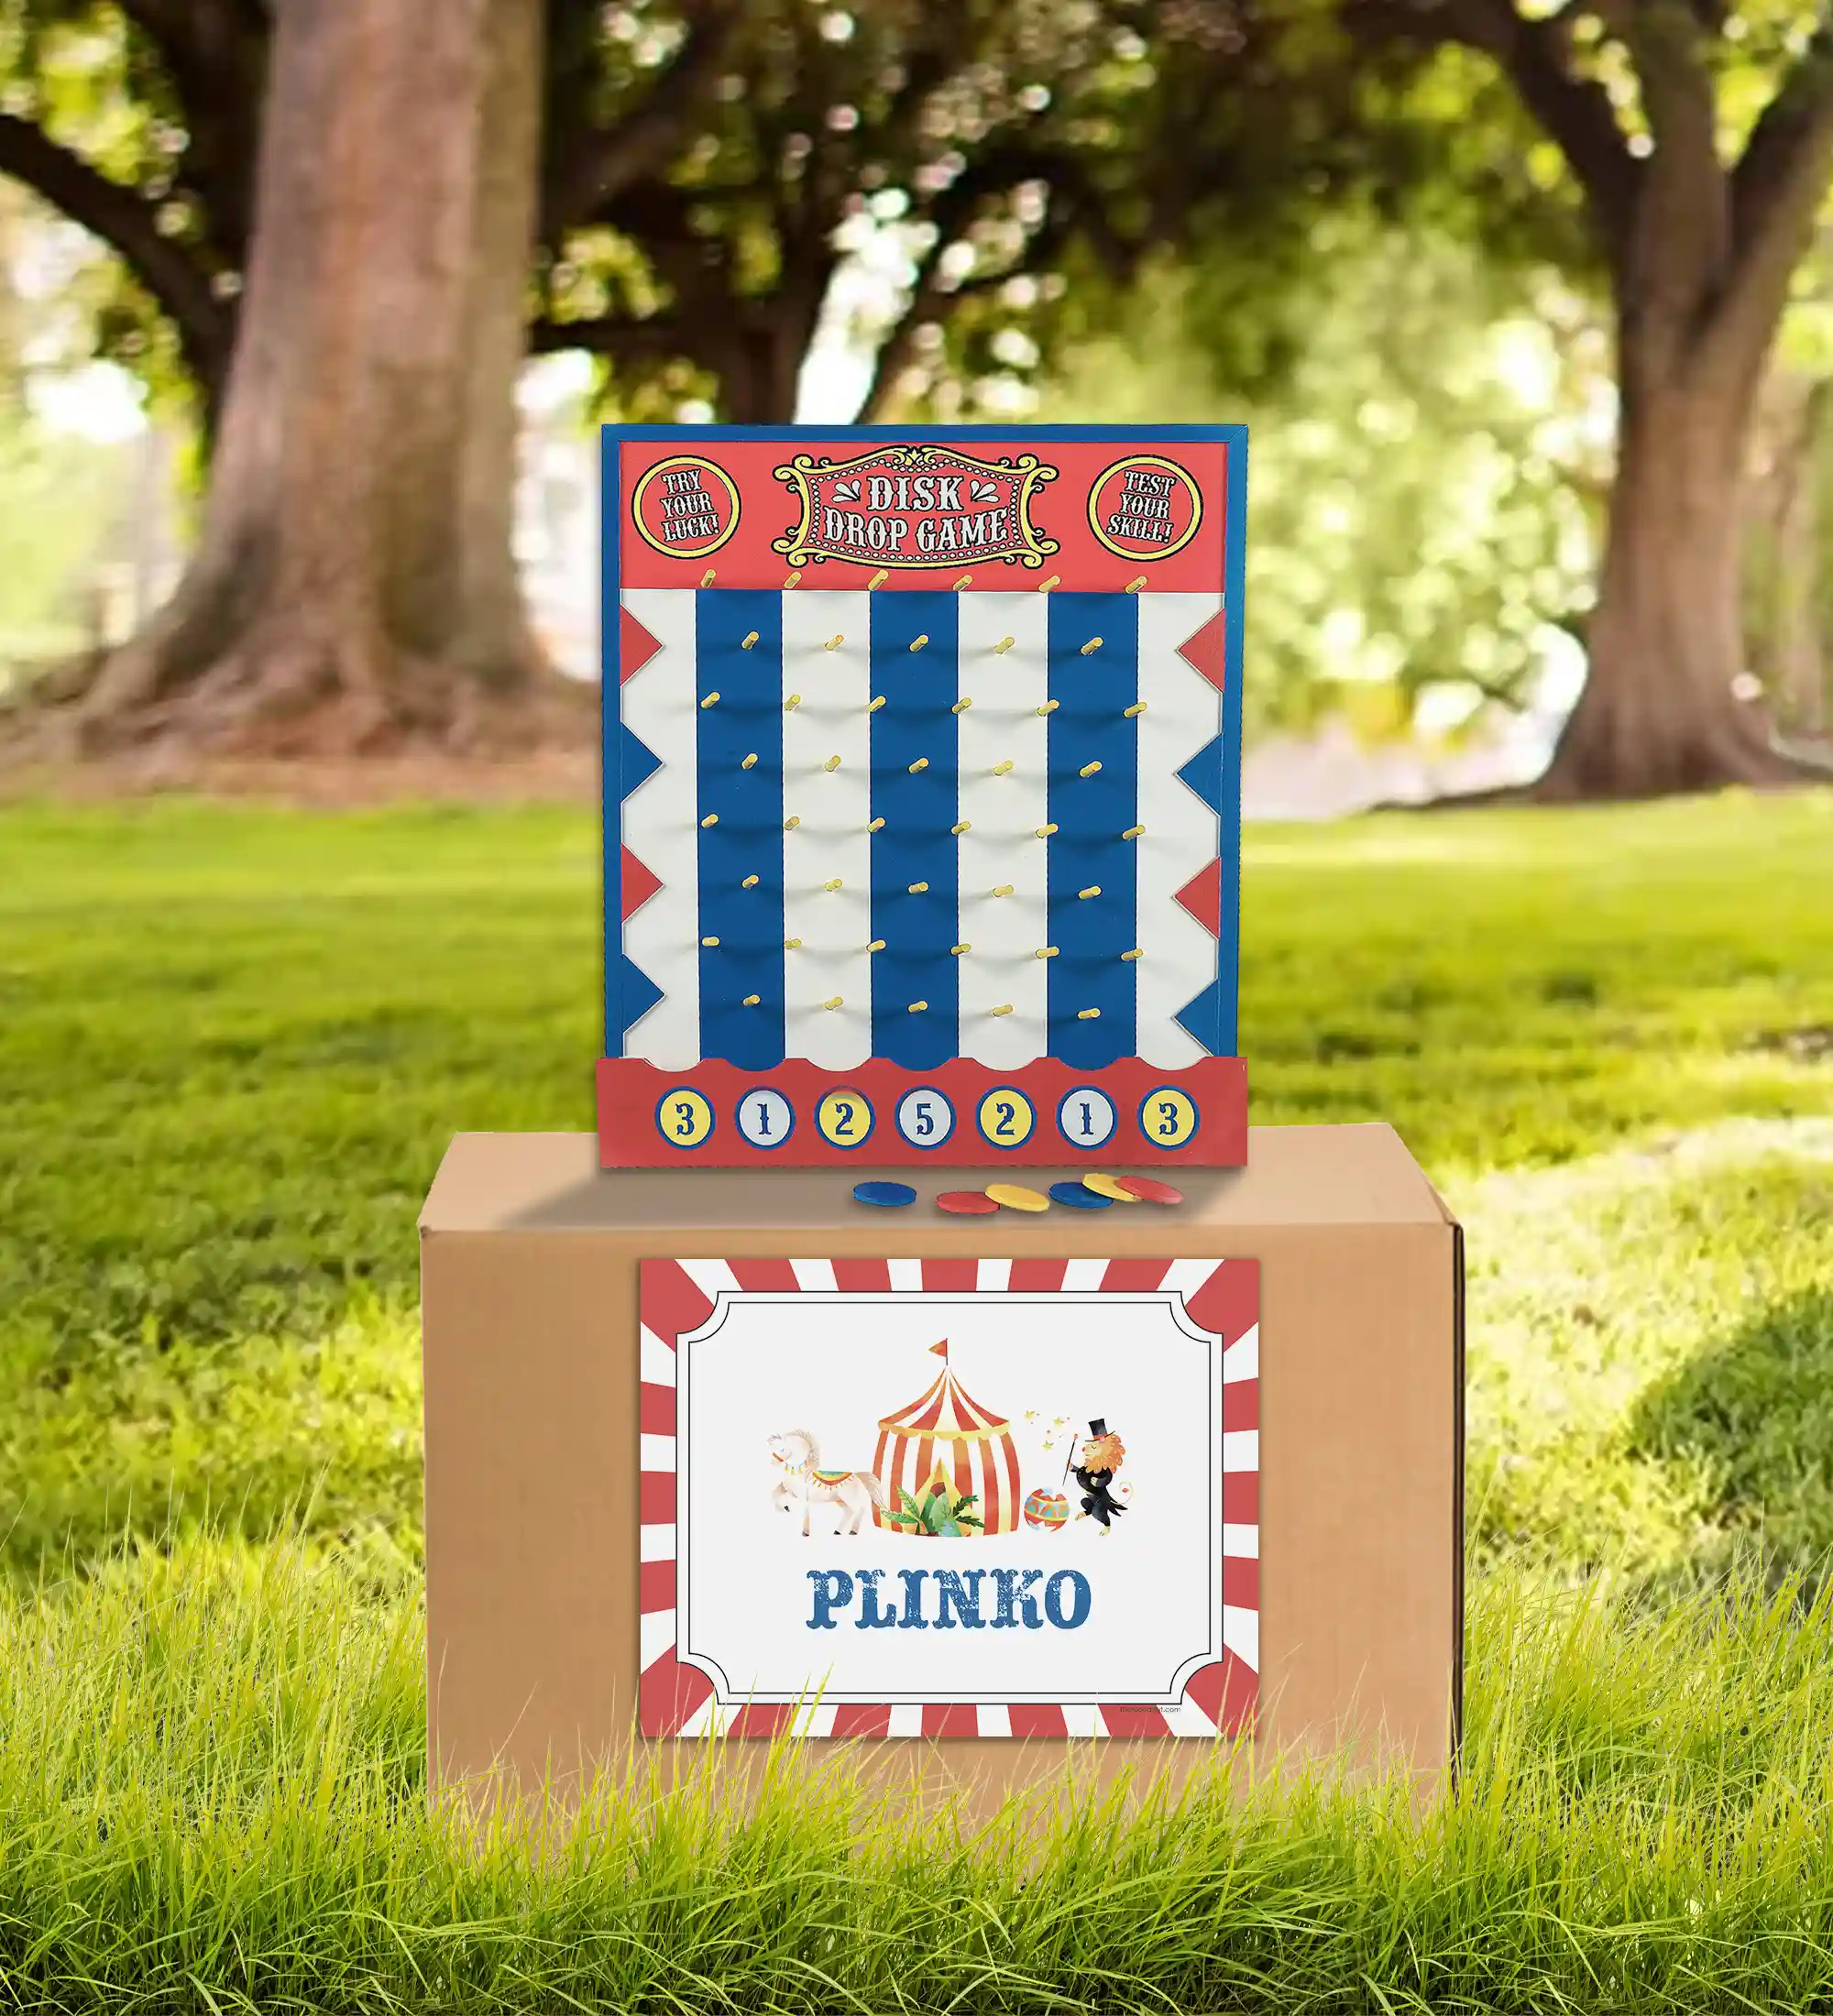 Plinko game for your next carnival birthday party, circus party, school carnival or church carnival. Download the printable carnival sign bundles from our site.